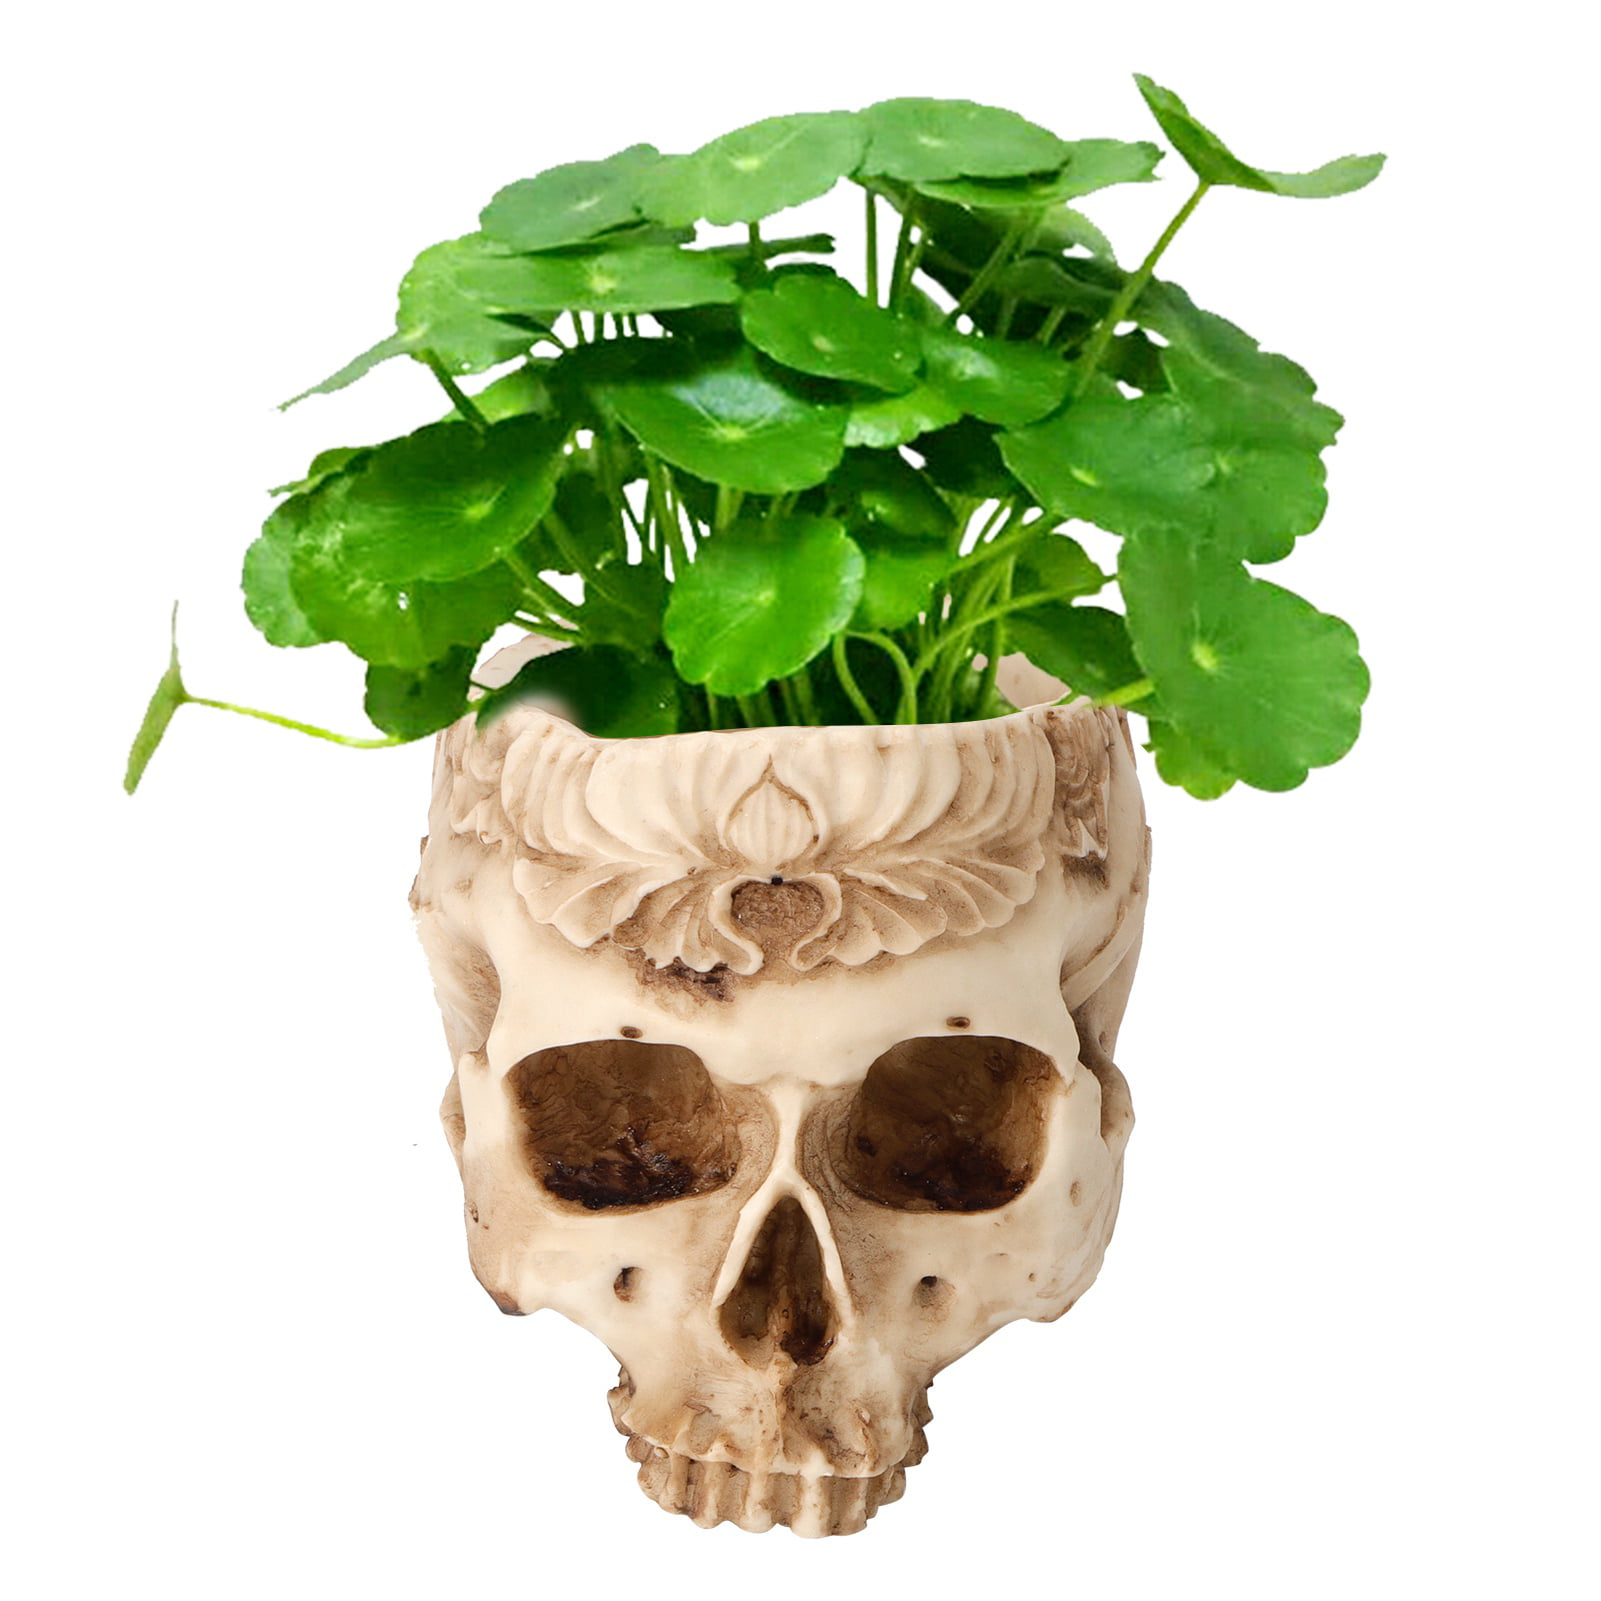 Skull Flower Pot Planters Resin Craftworks Personalized Home Furnishings Bar Ornaments 7.1 x 5 x 5.1in Skull Flowerpot 